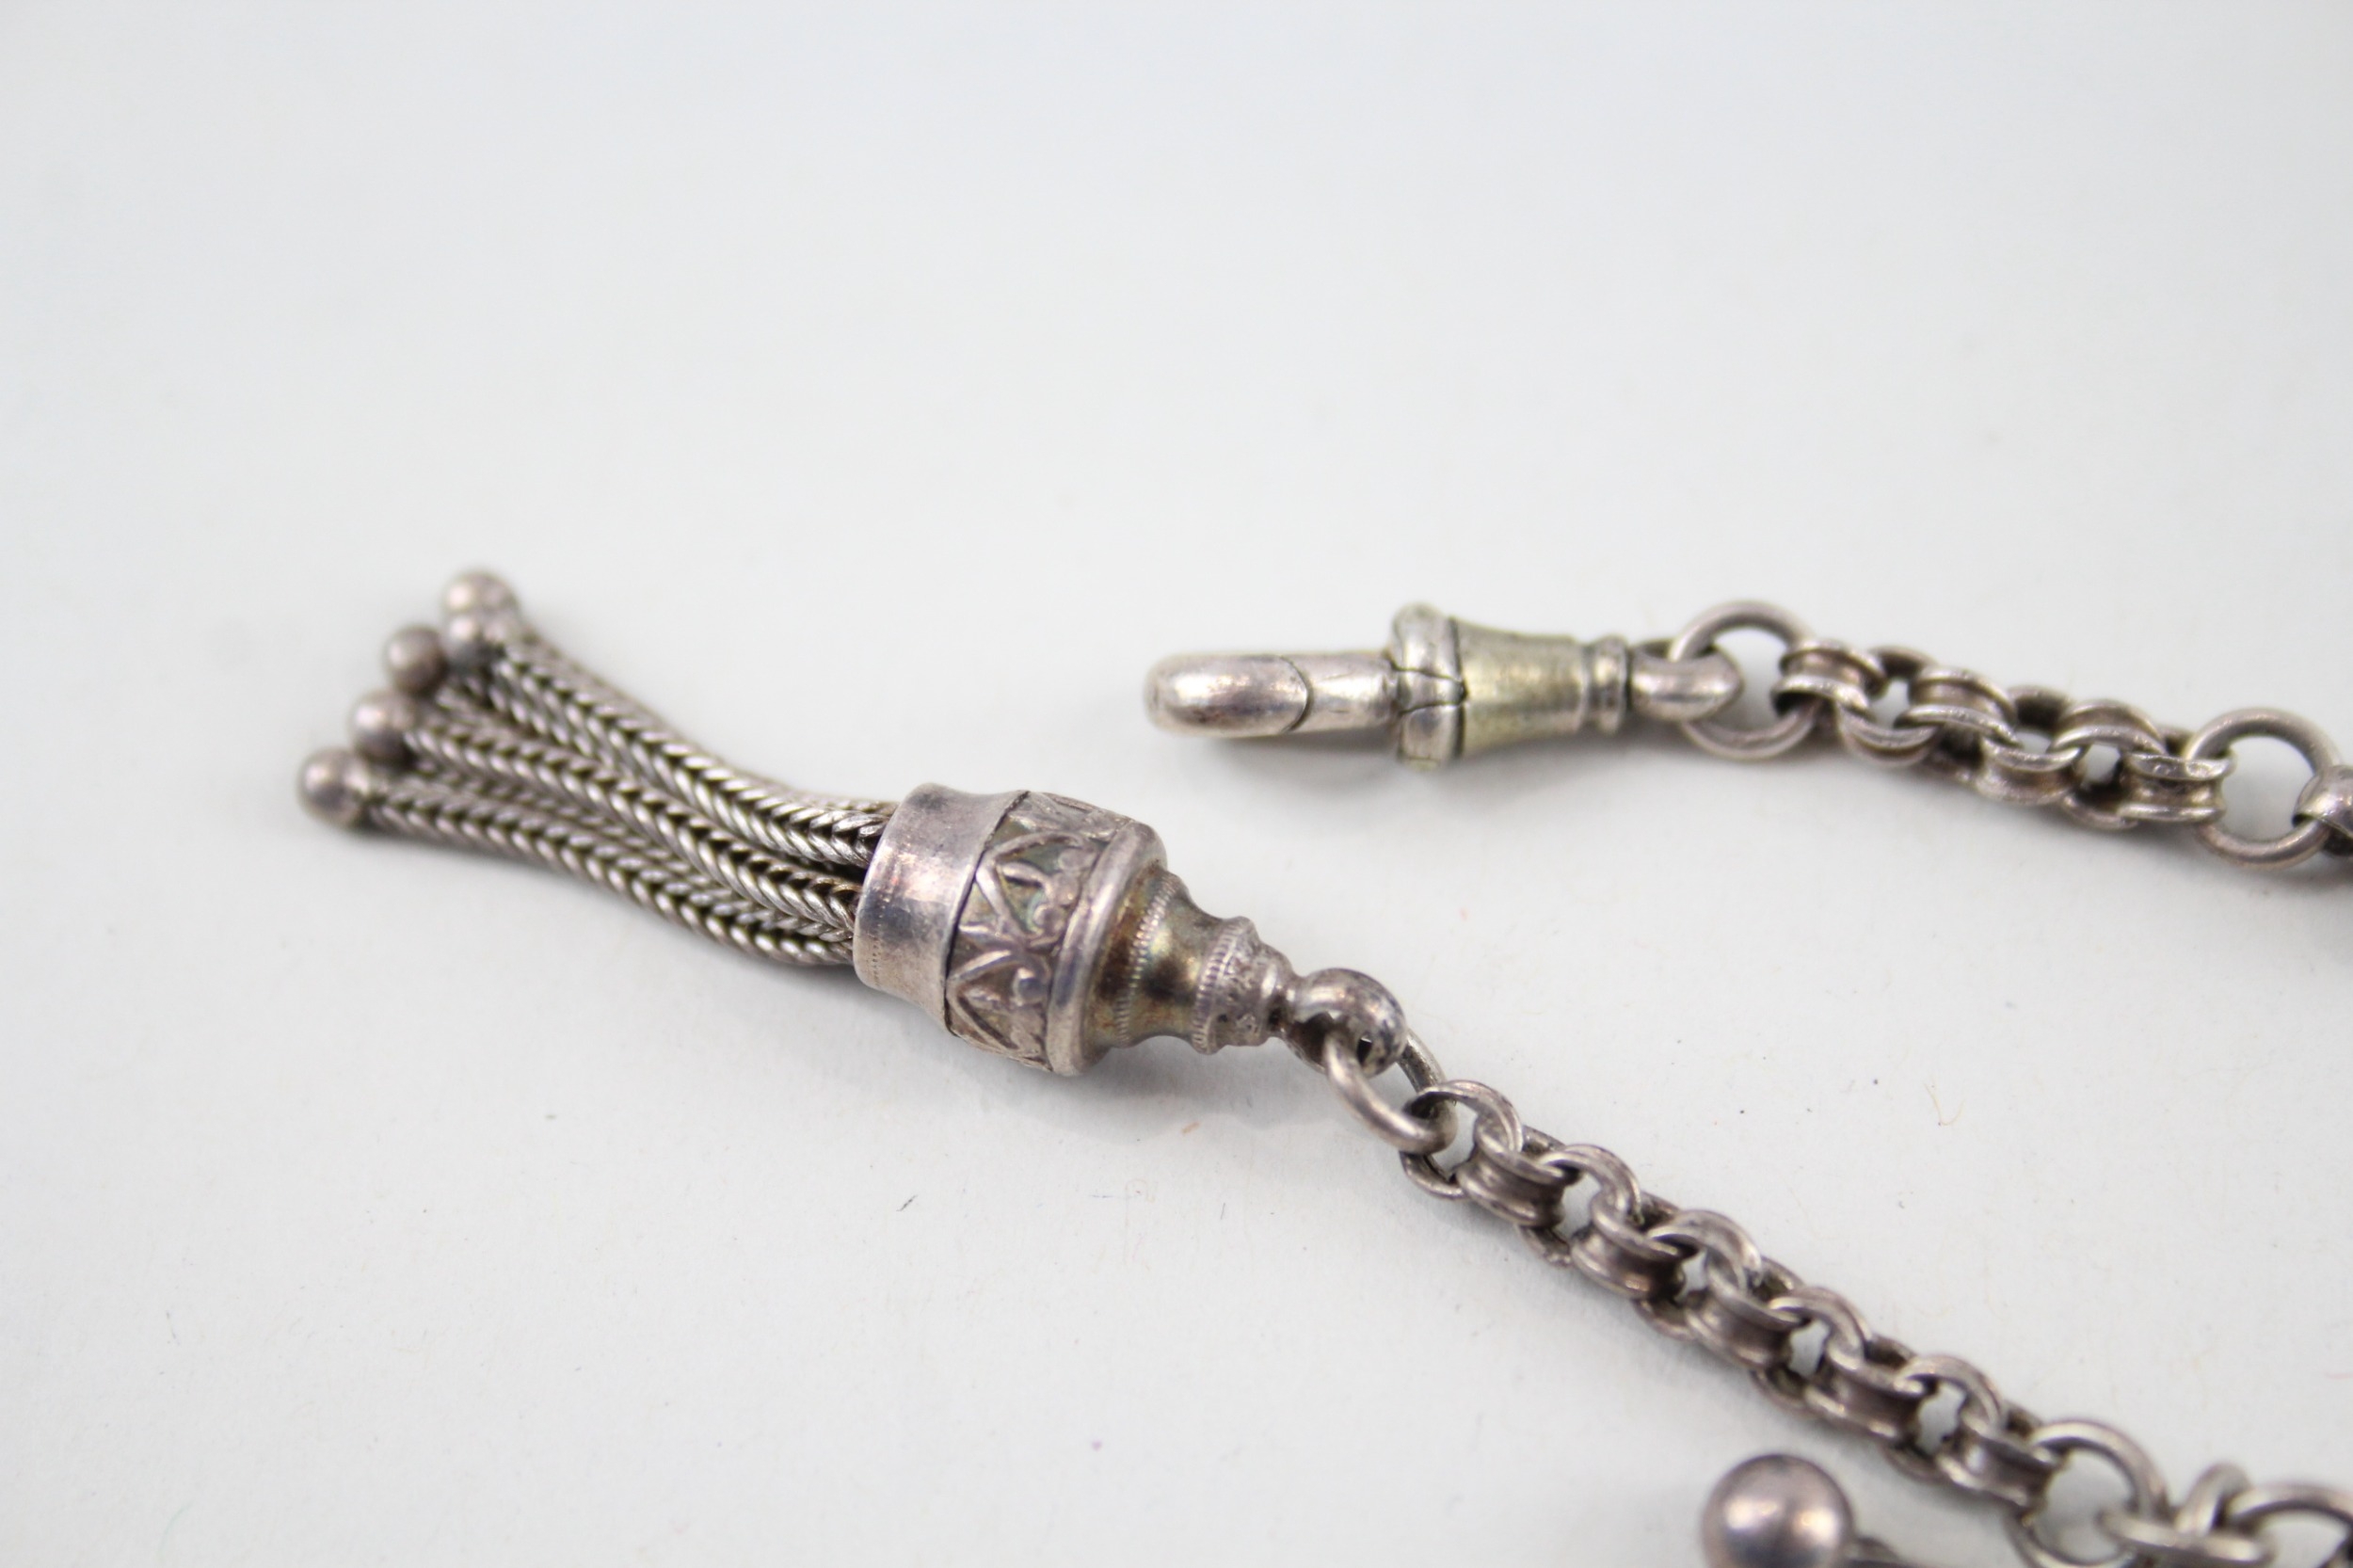 Silver antique Albertina chain with tassel (11g) - Image 4 of 4